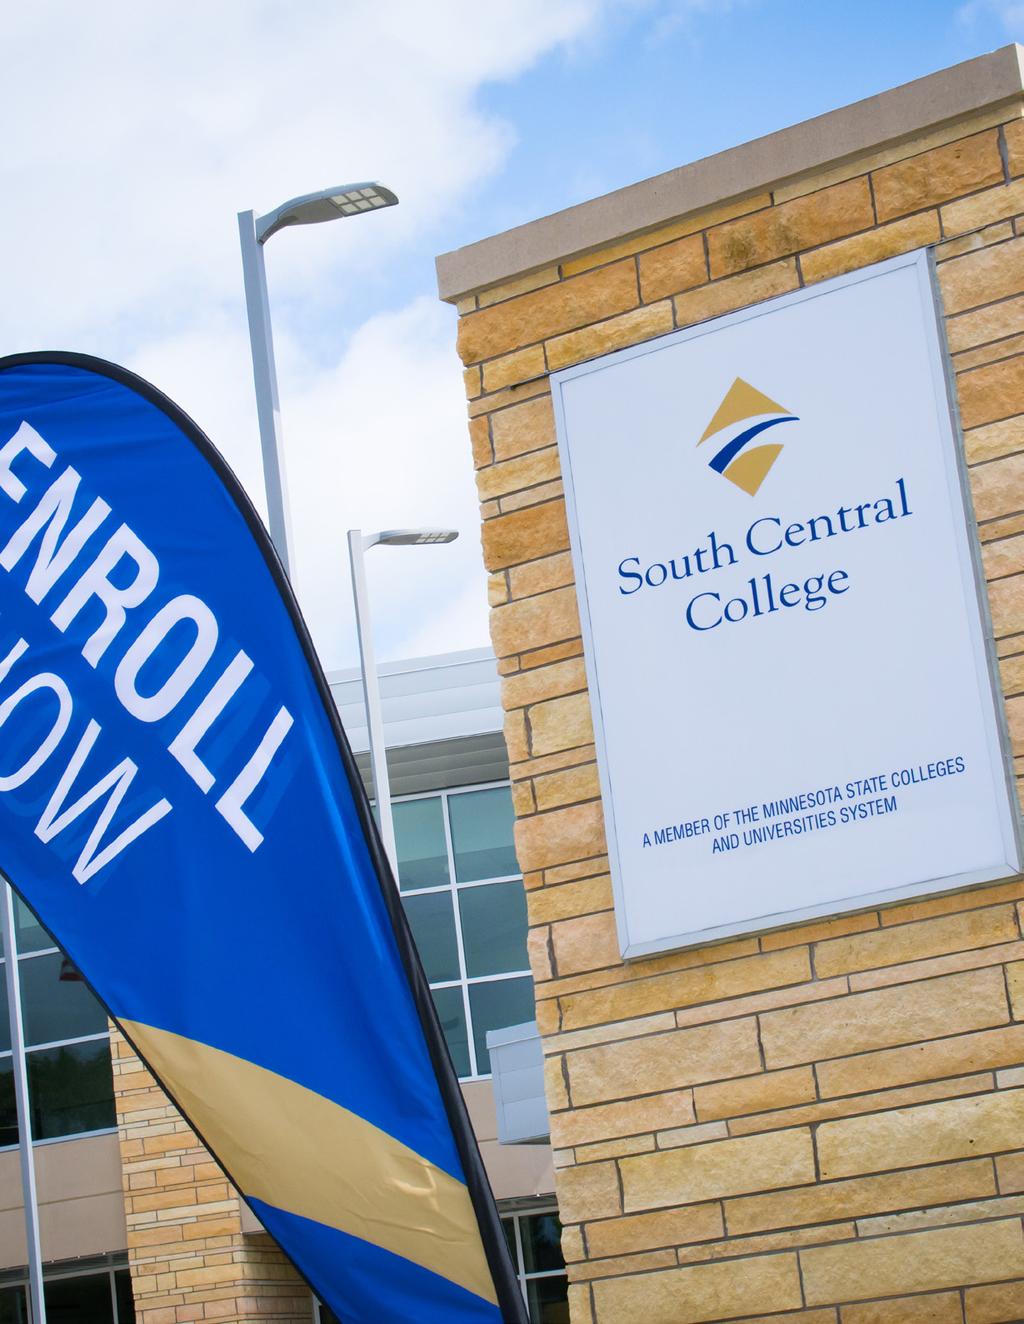 South Central College South Central College, with campuses in North Mankato and Faribault, Minnesota, invites nominations and applications for the position of Vice President of Student and Academic